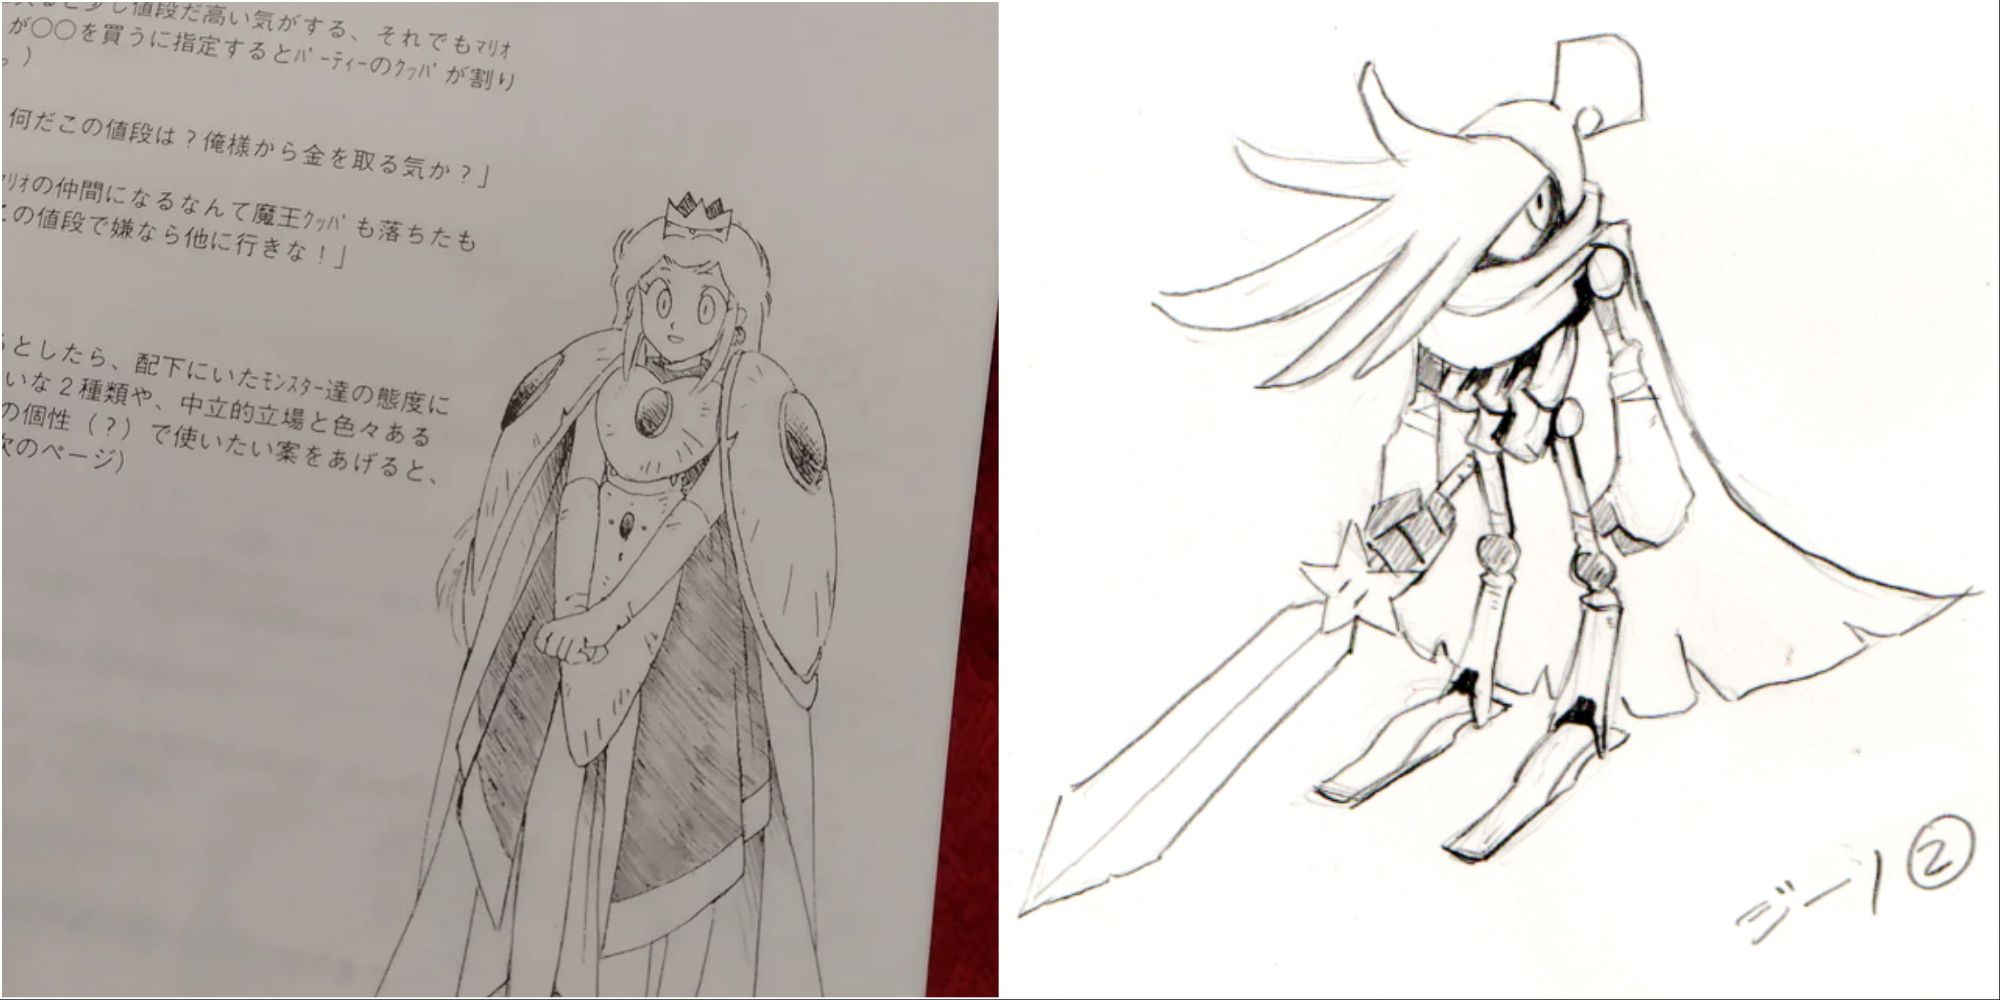 Early sketches of Peach and Geno in Super Mario RPG